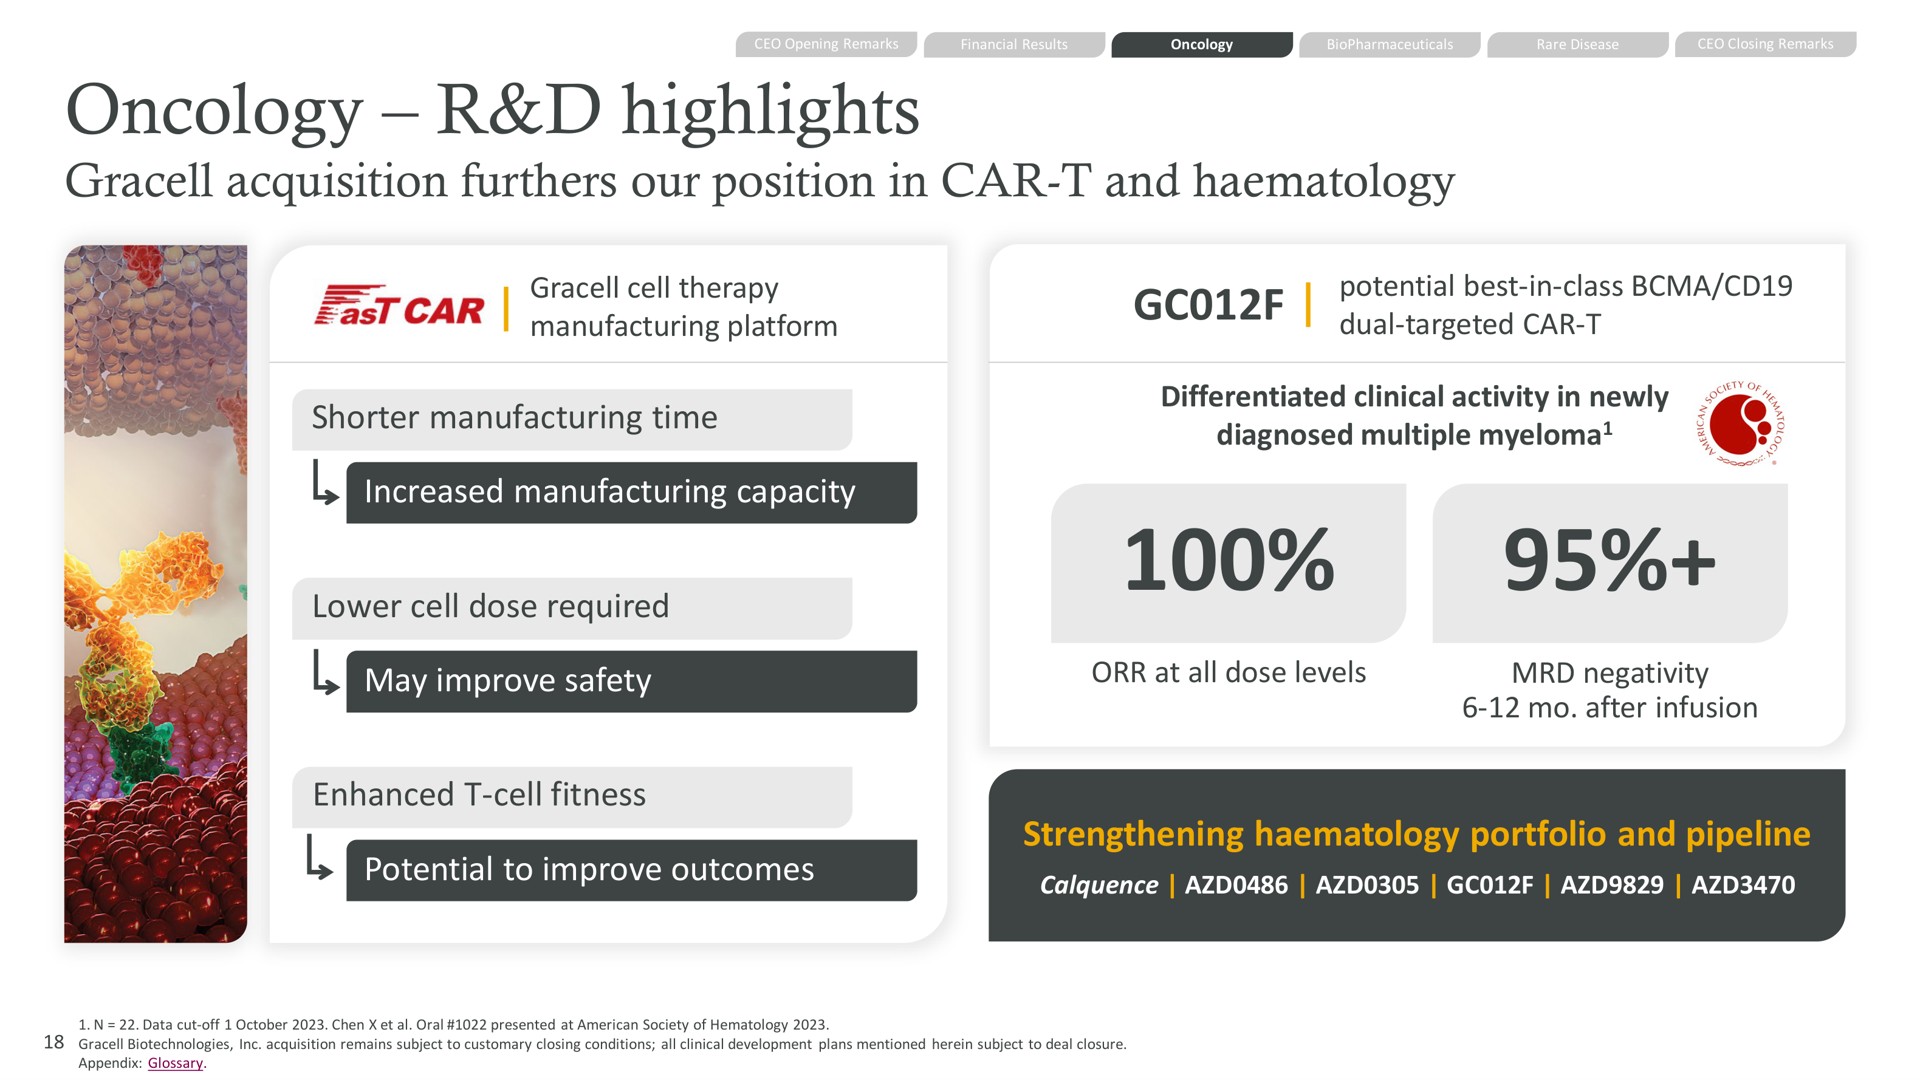 oncology highlights acquisition furthers our position in car and shorter manufacturing time increased manufacturing capacity lower cell dose required may improve safety enhanced cell fitness potential to improve outcomes strengthening portfolio and pipeline | AstraZeneca